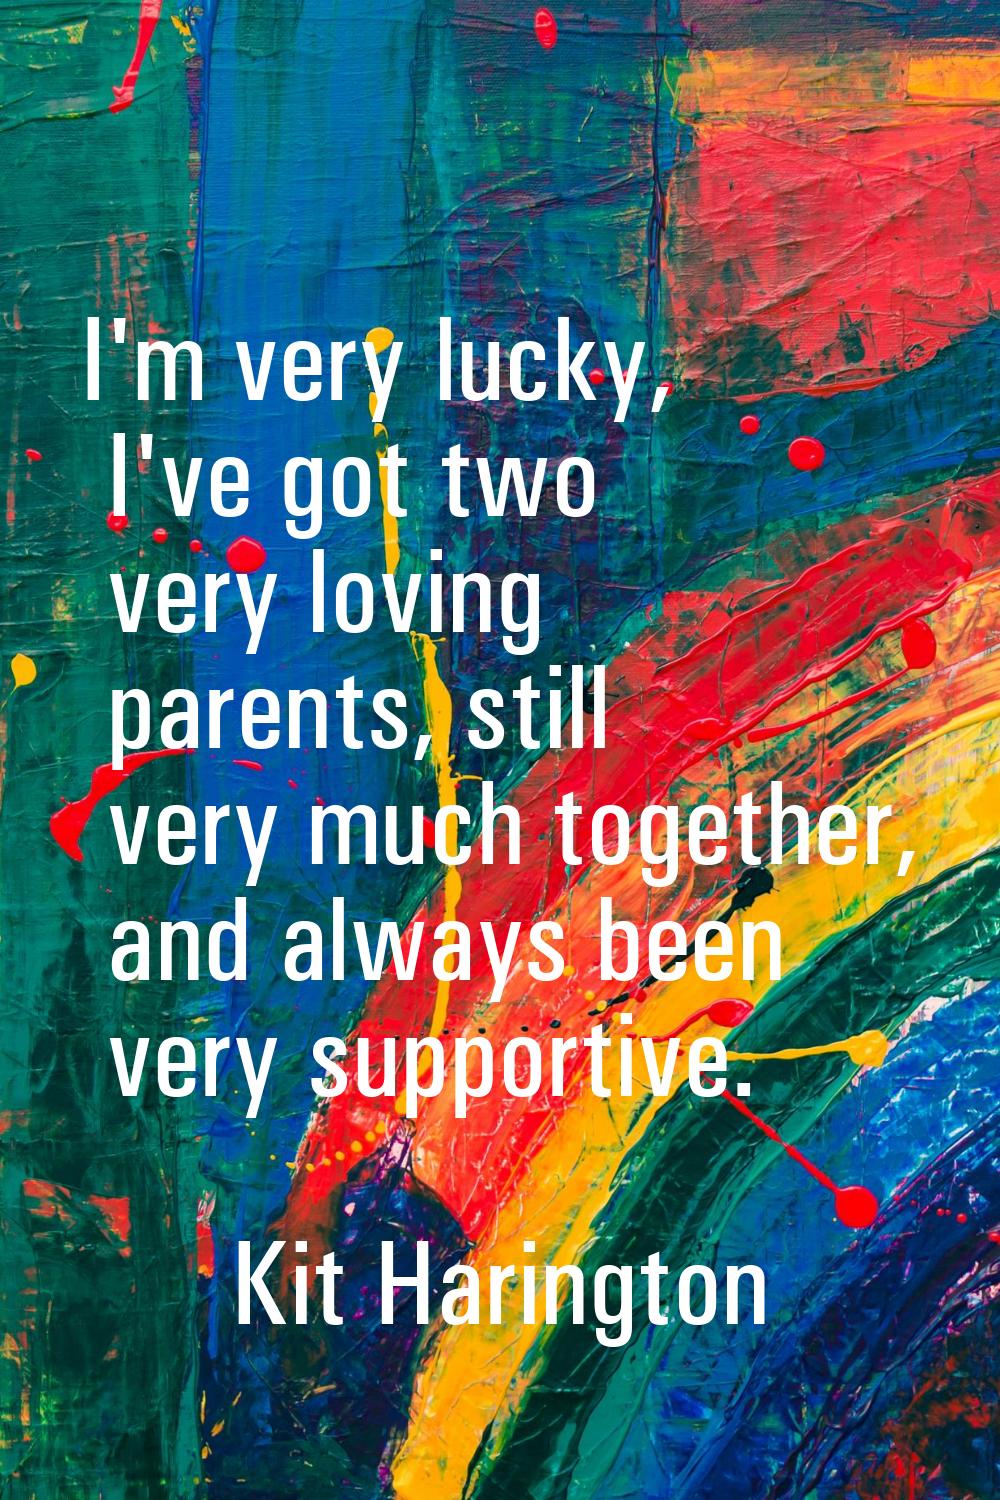 I'm very lucky, I've got two very loving parents, still very much together, and always been very su